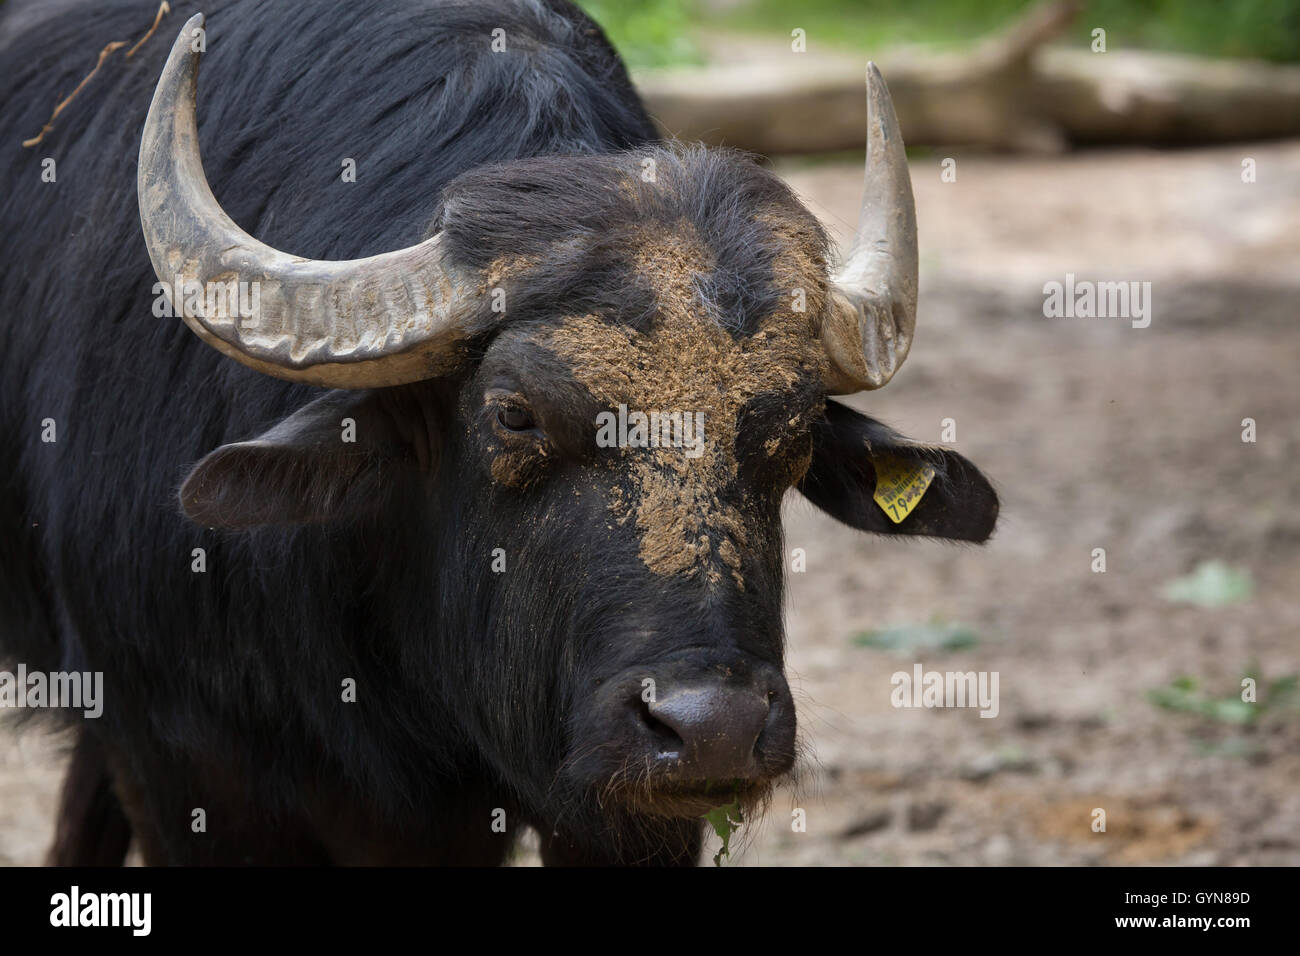 European Water Buffalo High Resolution Stock Photography and Images - Alamy